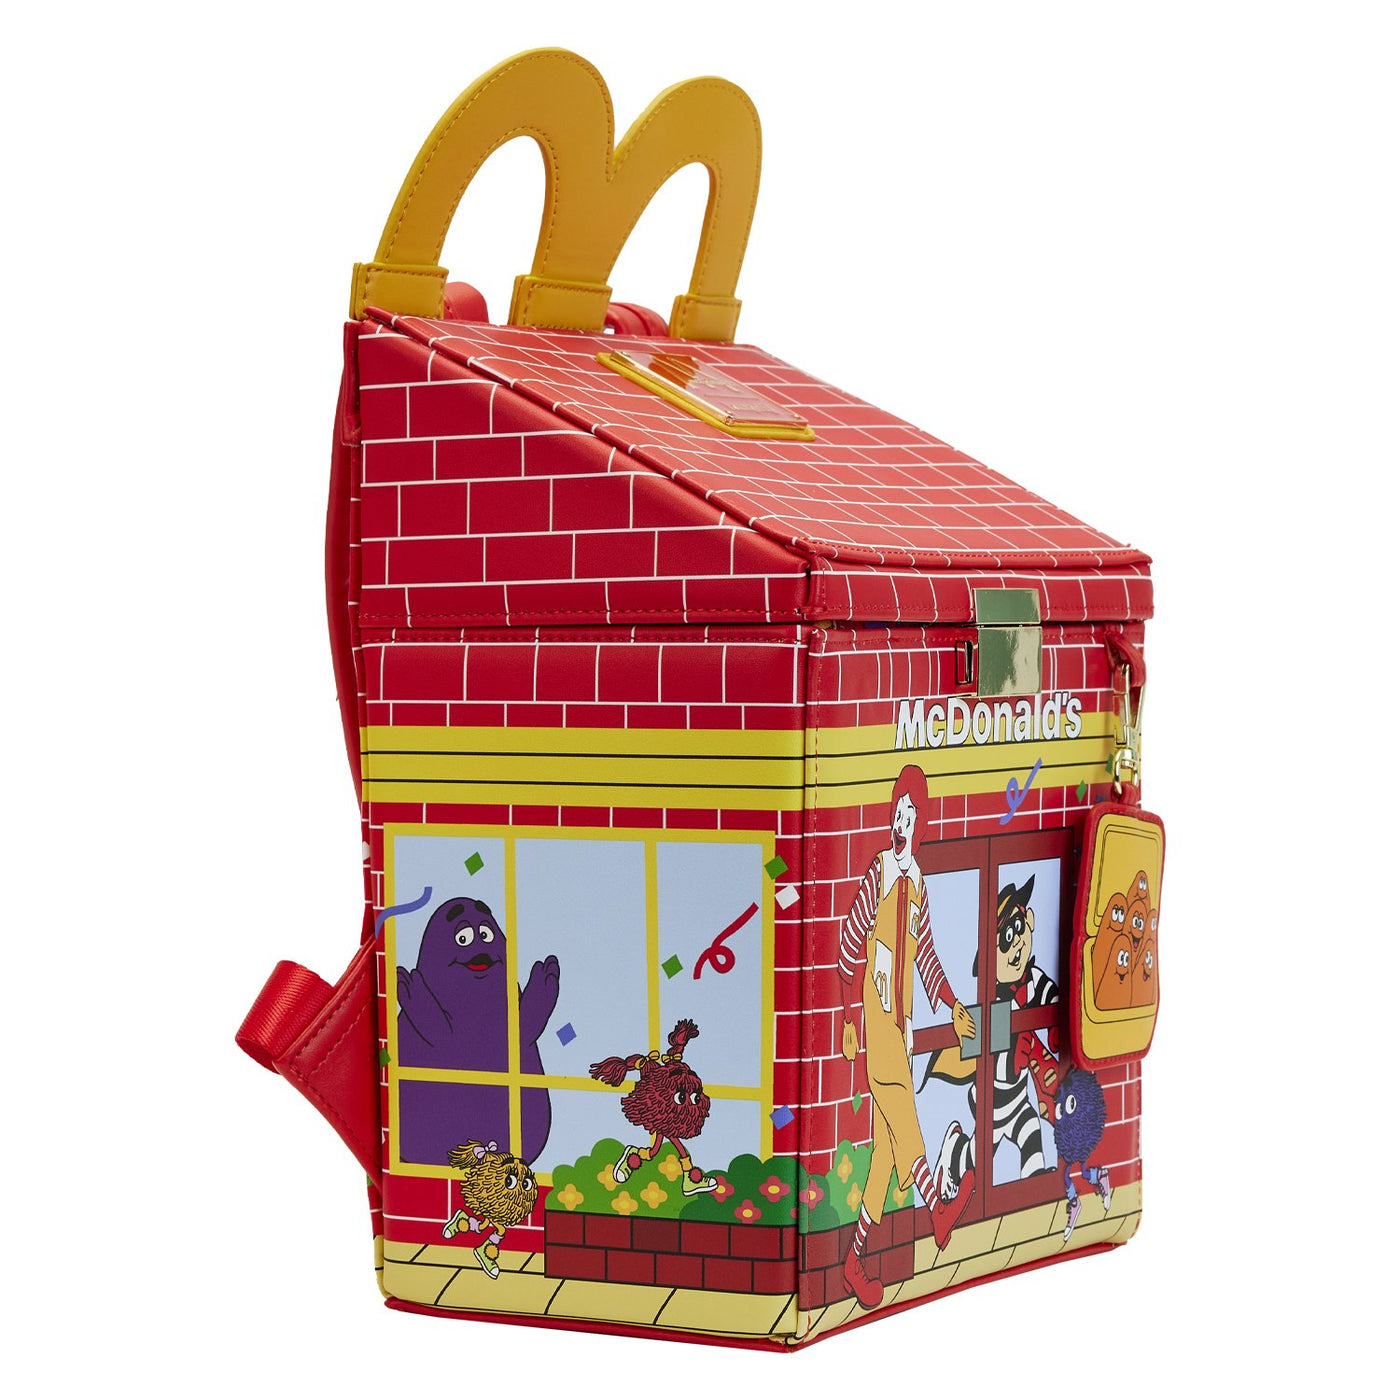 New Loungefly McDonald's collection is available now